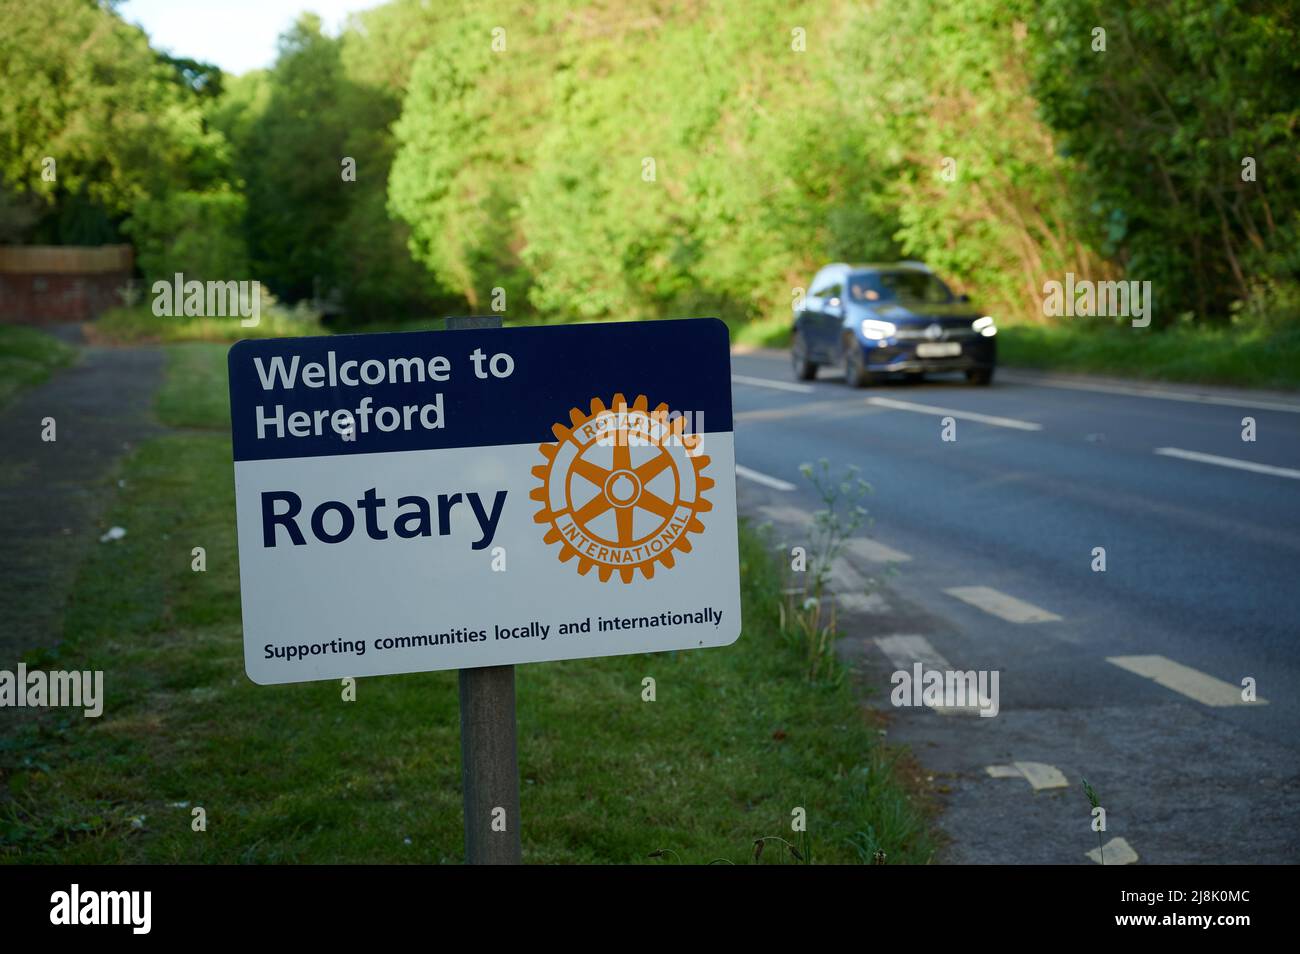 hereforduk - 14 may 2022: welcome to hereford sign from rotary club with blurred out car passing on road Stock Photo